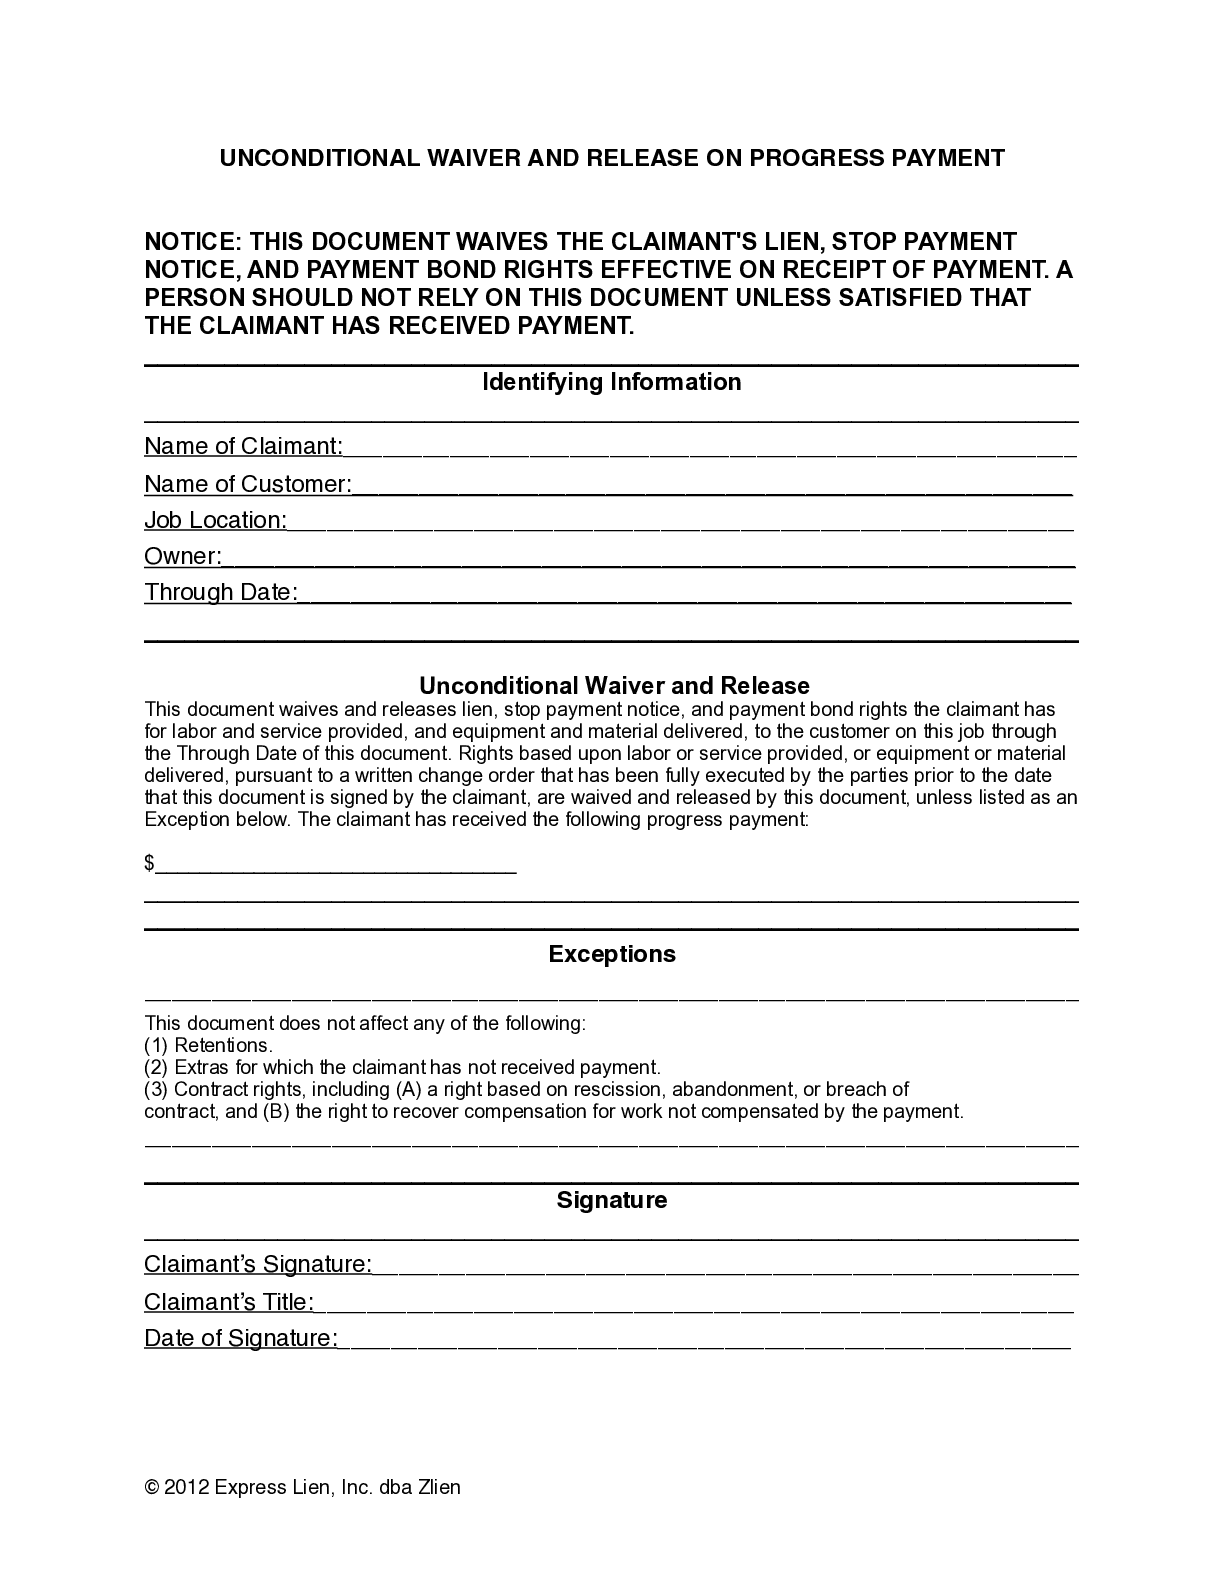 West Virginia Partial Unconditional Lien Waiver Form - free from